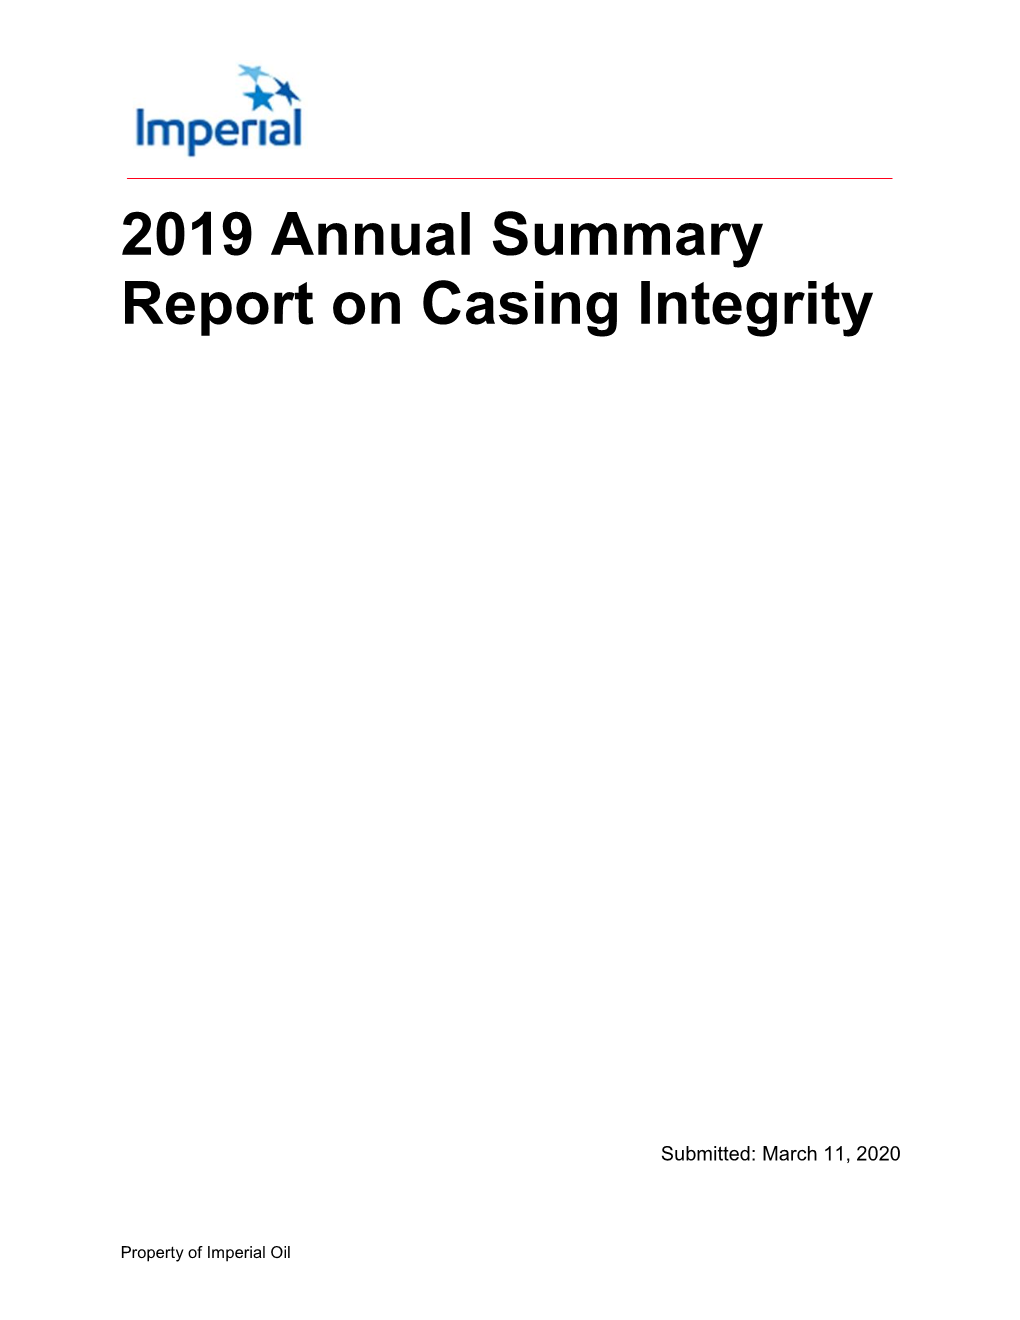 2019 Annual Summary Report on Casing Integrity